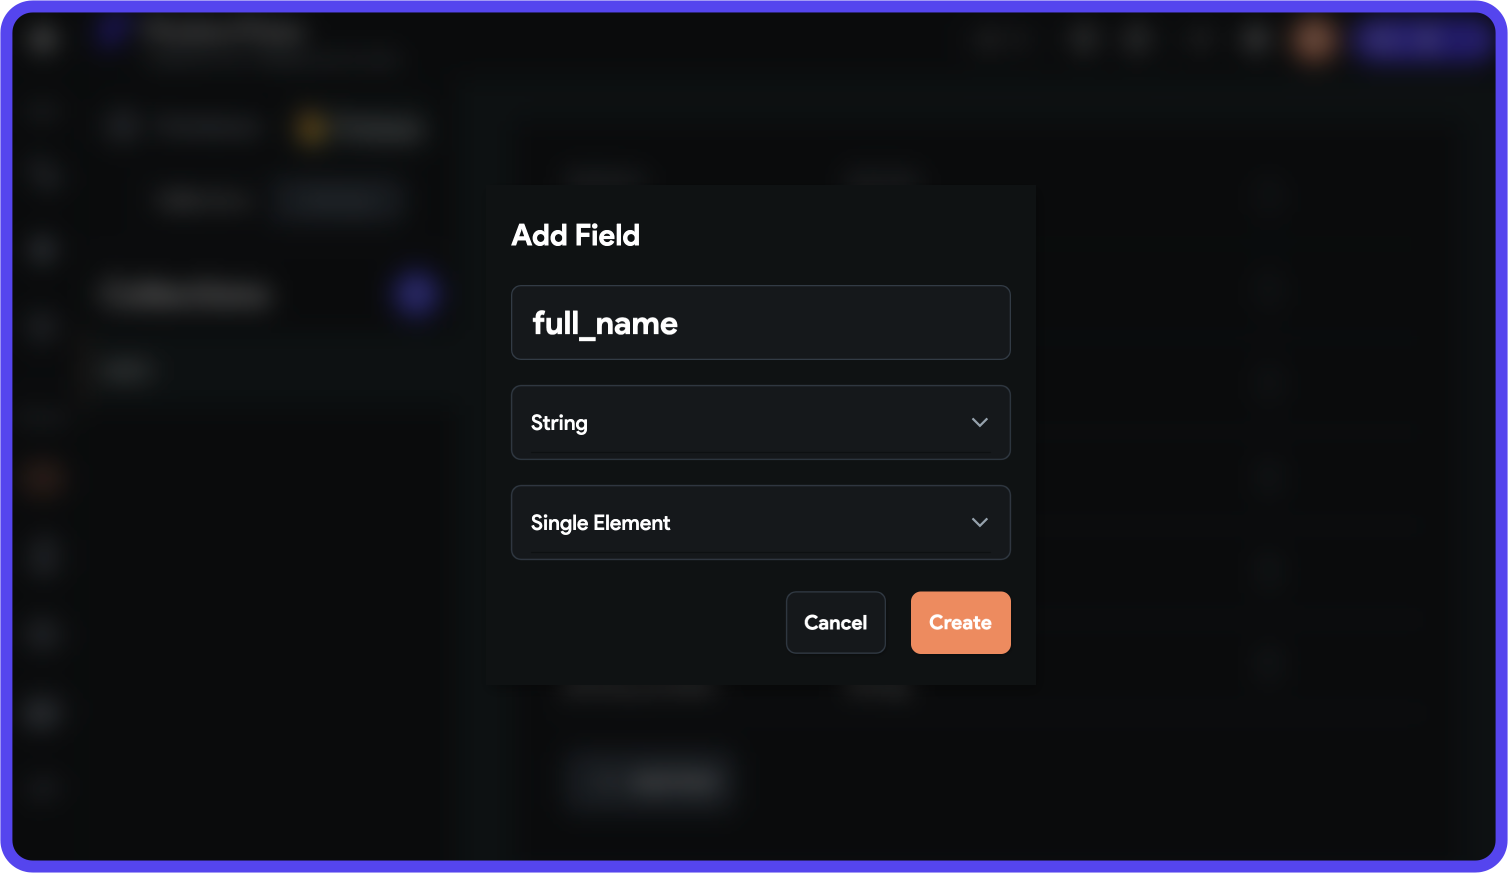 Dialog box for adding a field to the users collection